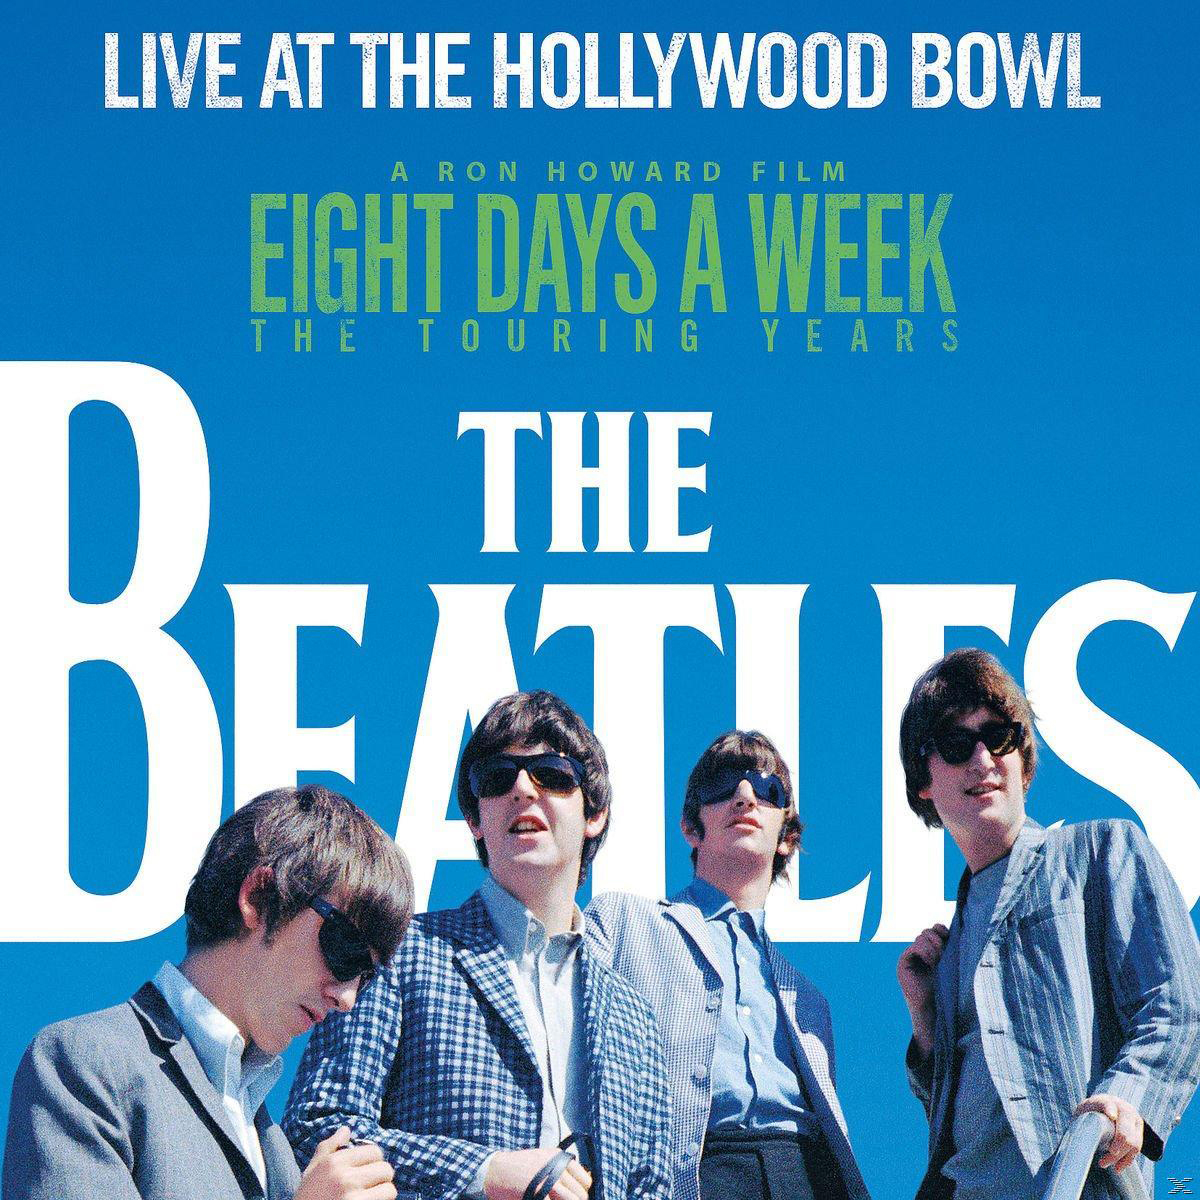 Live - Hollywood The At Beatles Bowl The - (Vinyl)